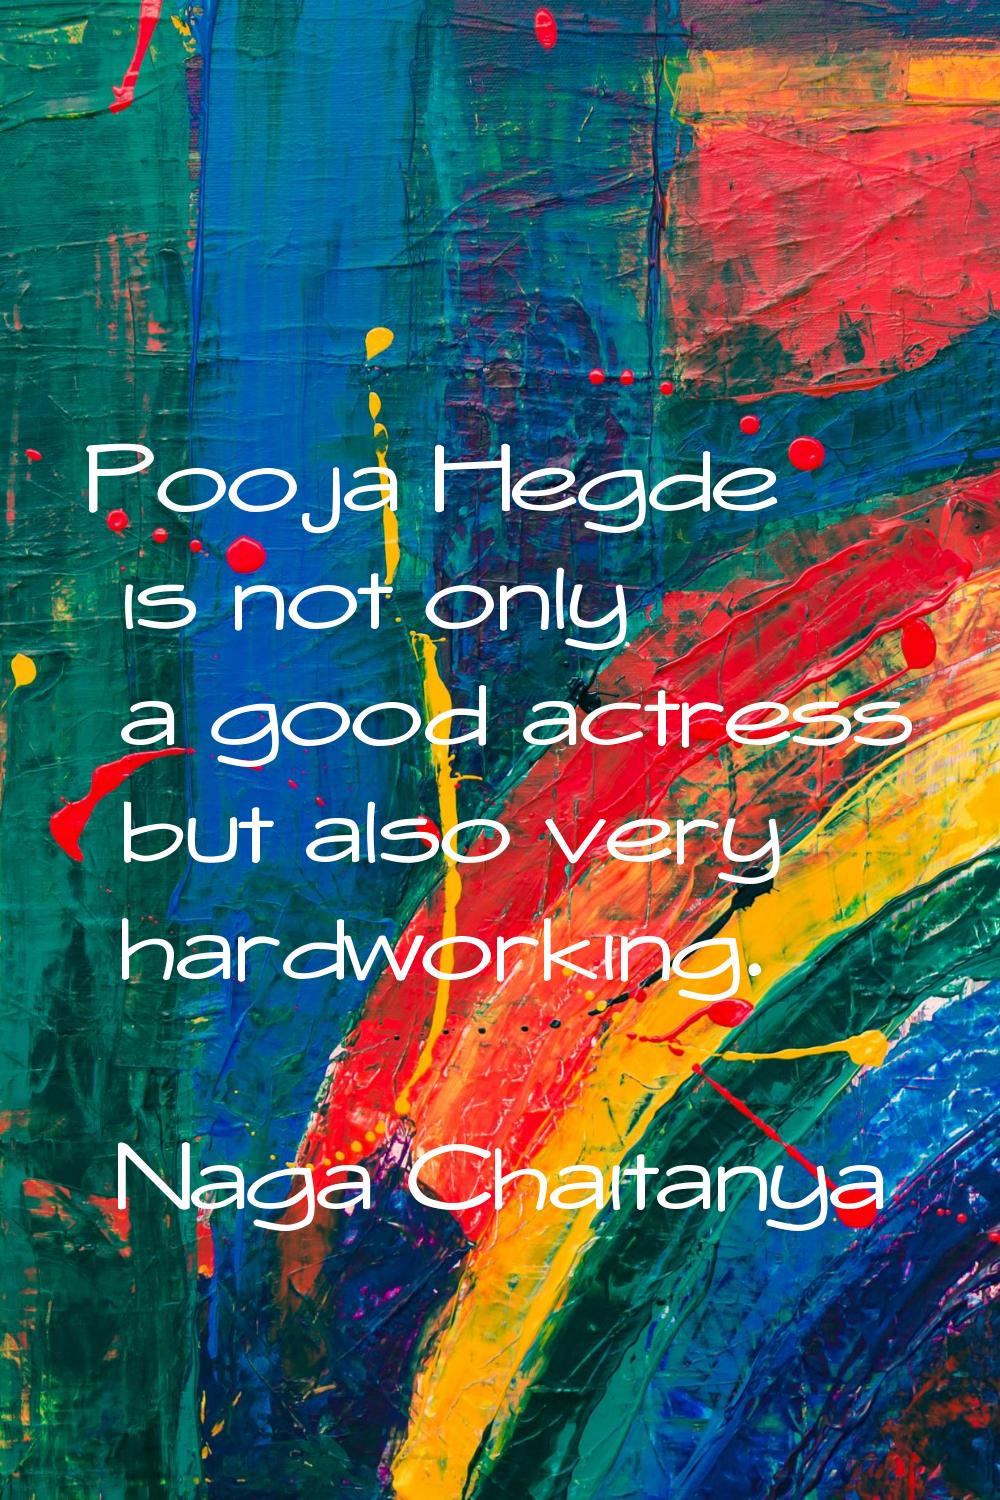 Pooja Hegde is not only a good actress but also very hardworking.